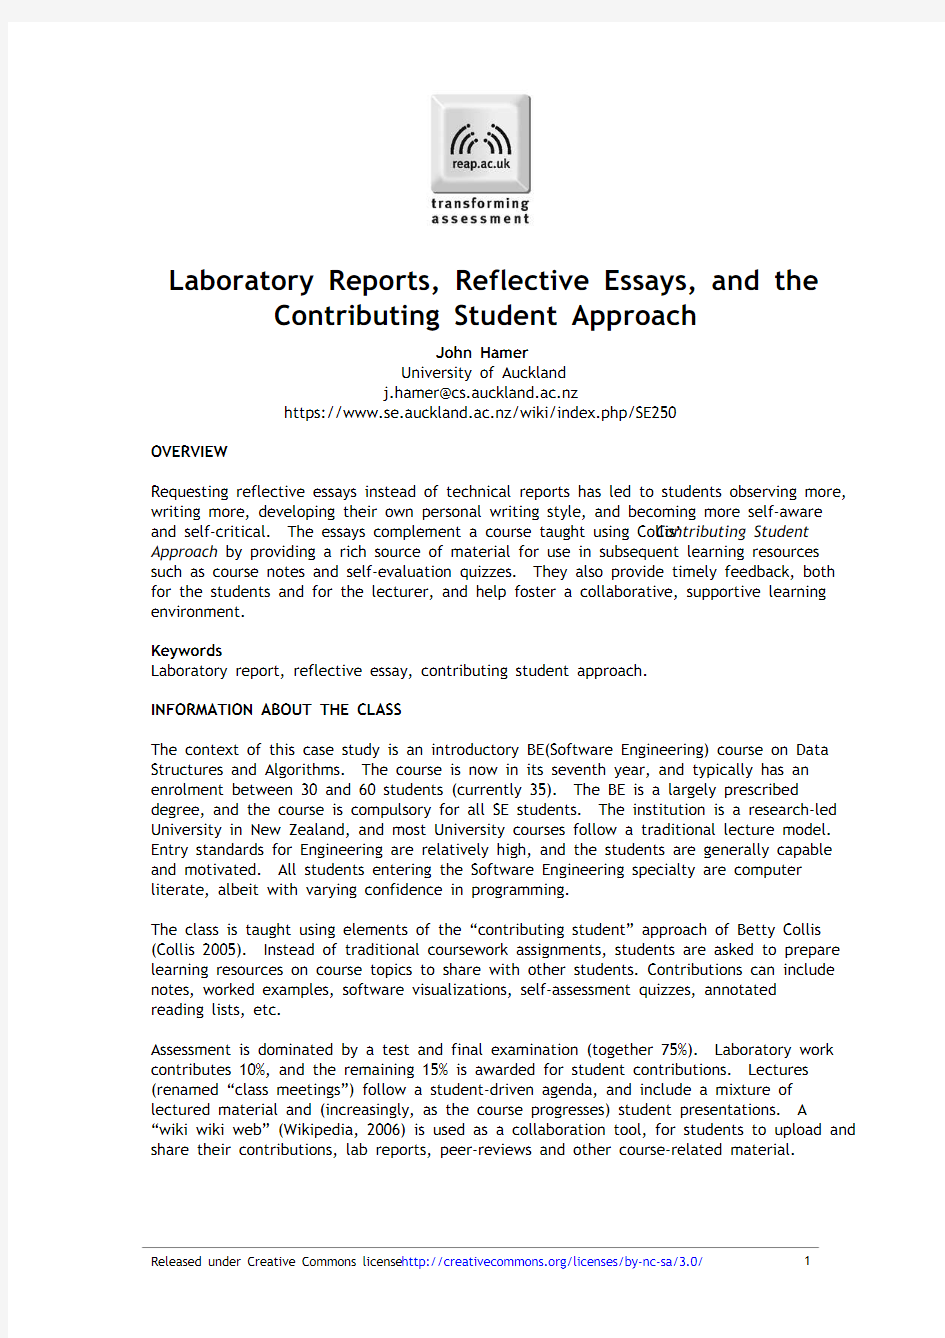 Laboratory Reports, Reflective Essays, and the Contributing Student Approach OVERVIEW